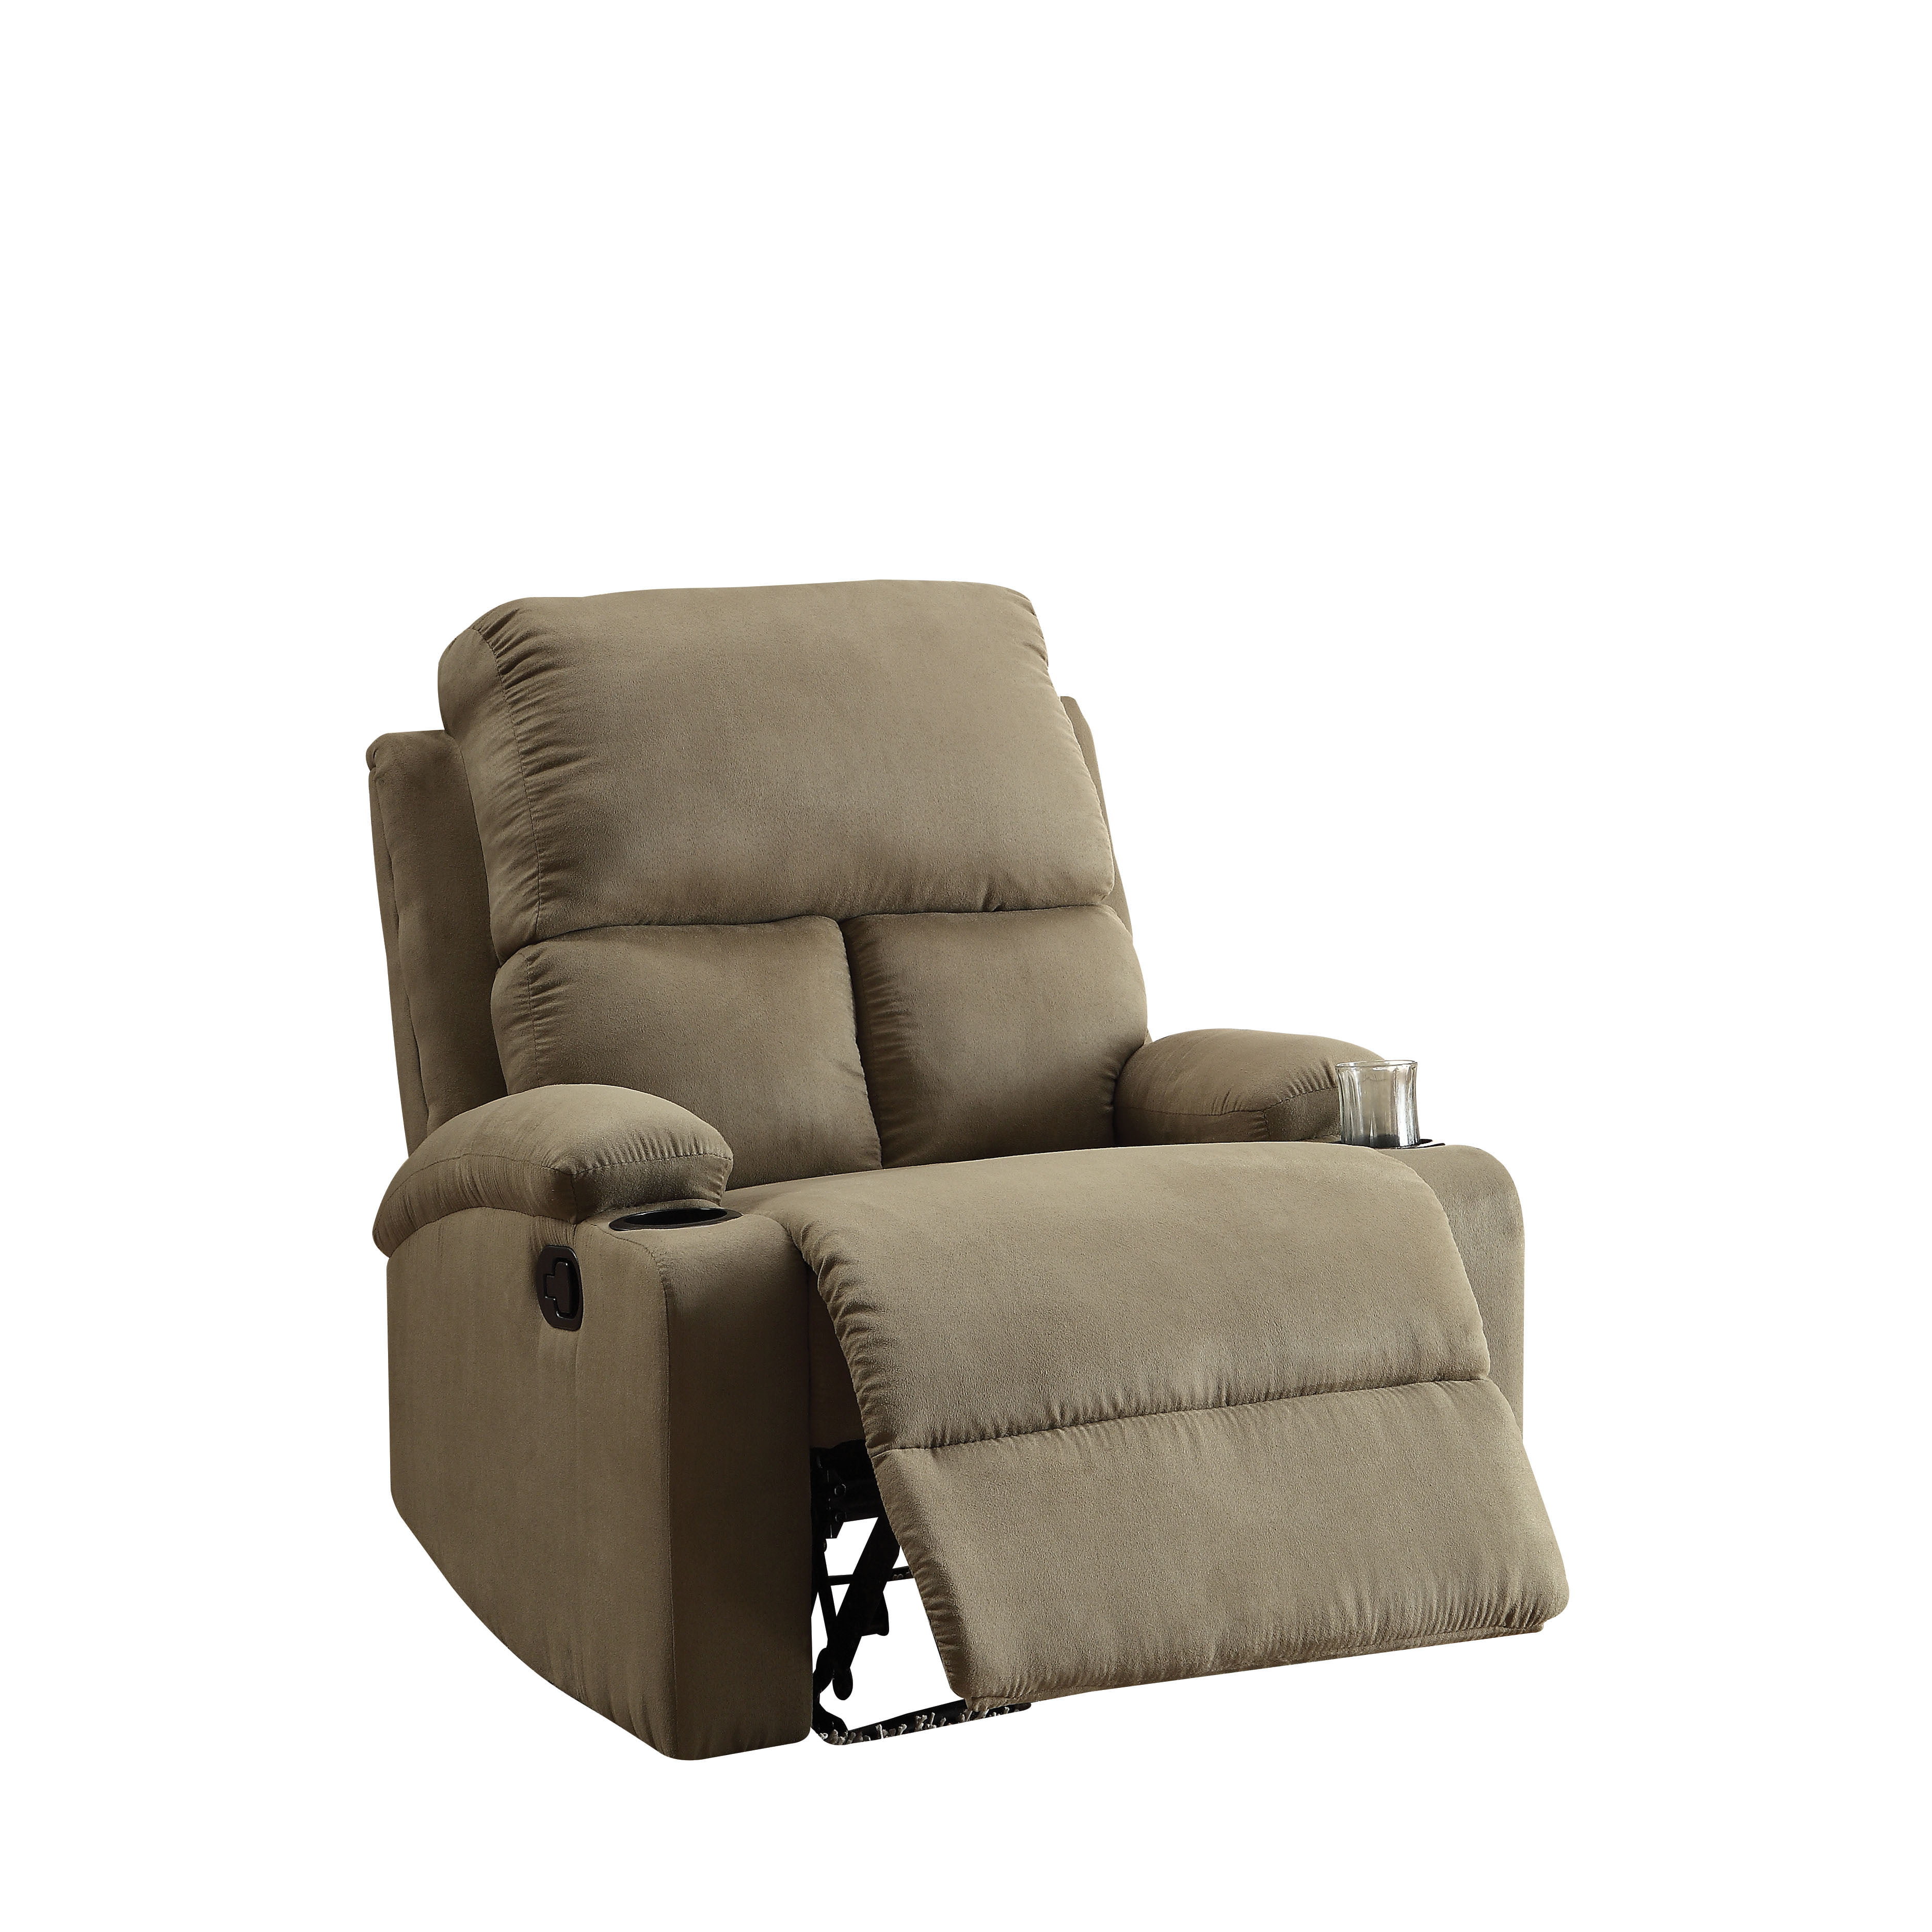 Acme Rosia Beige Microfiber Recliner, Microfiber Recliner Chair With Cup Holder